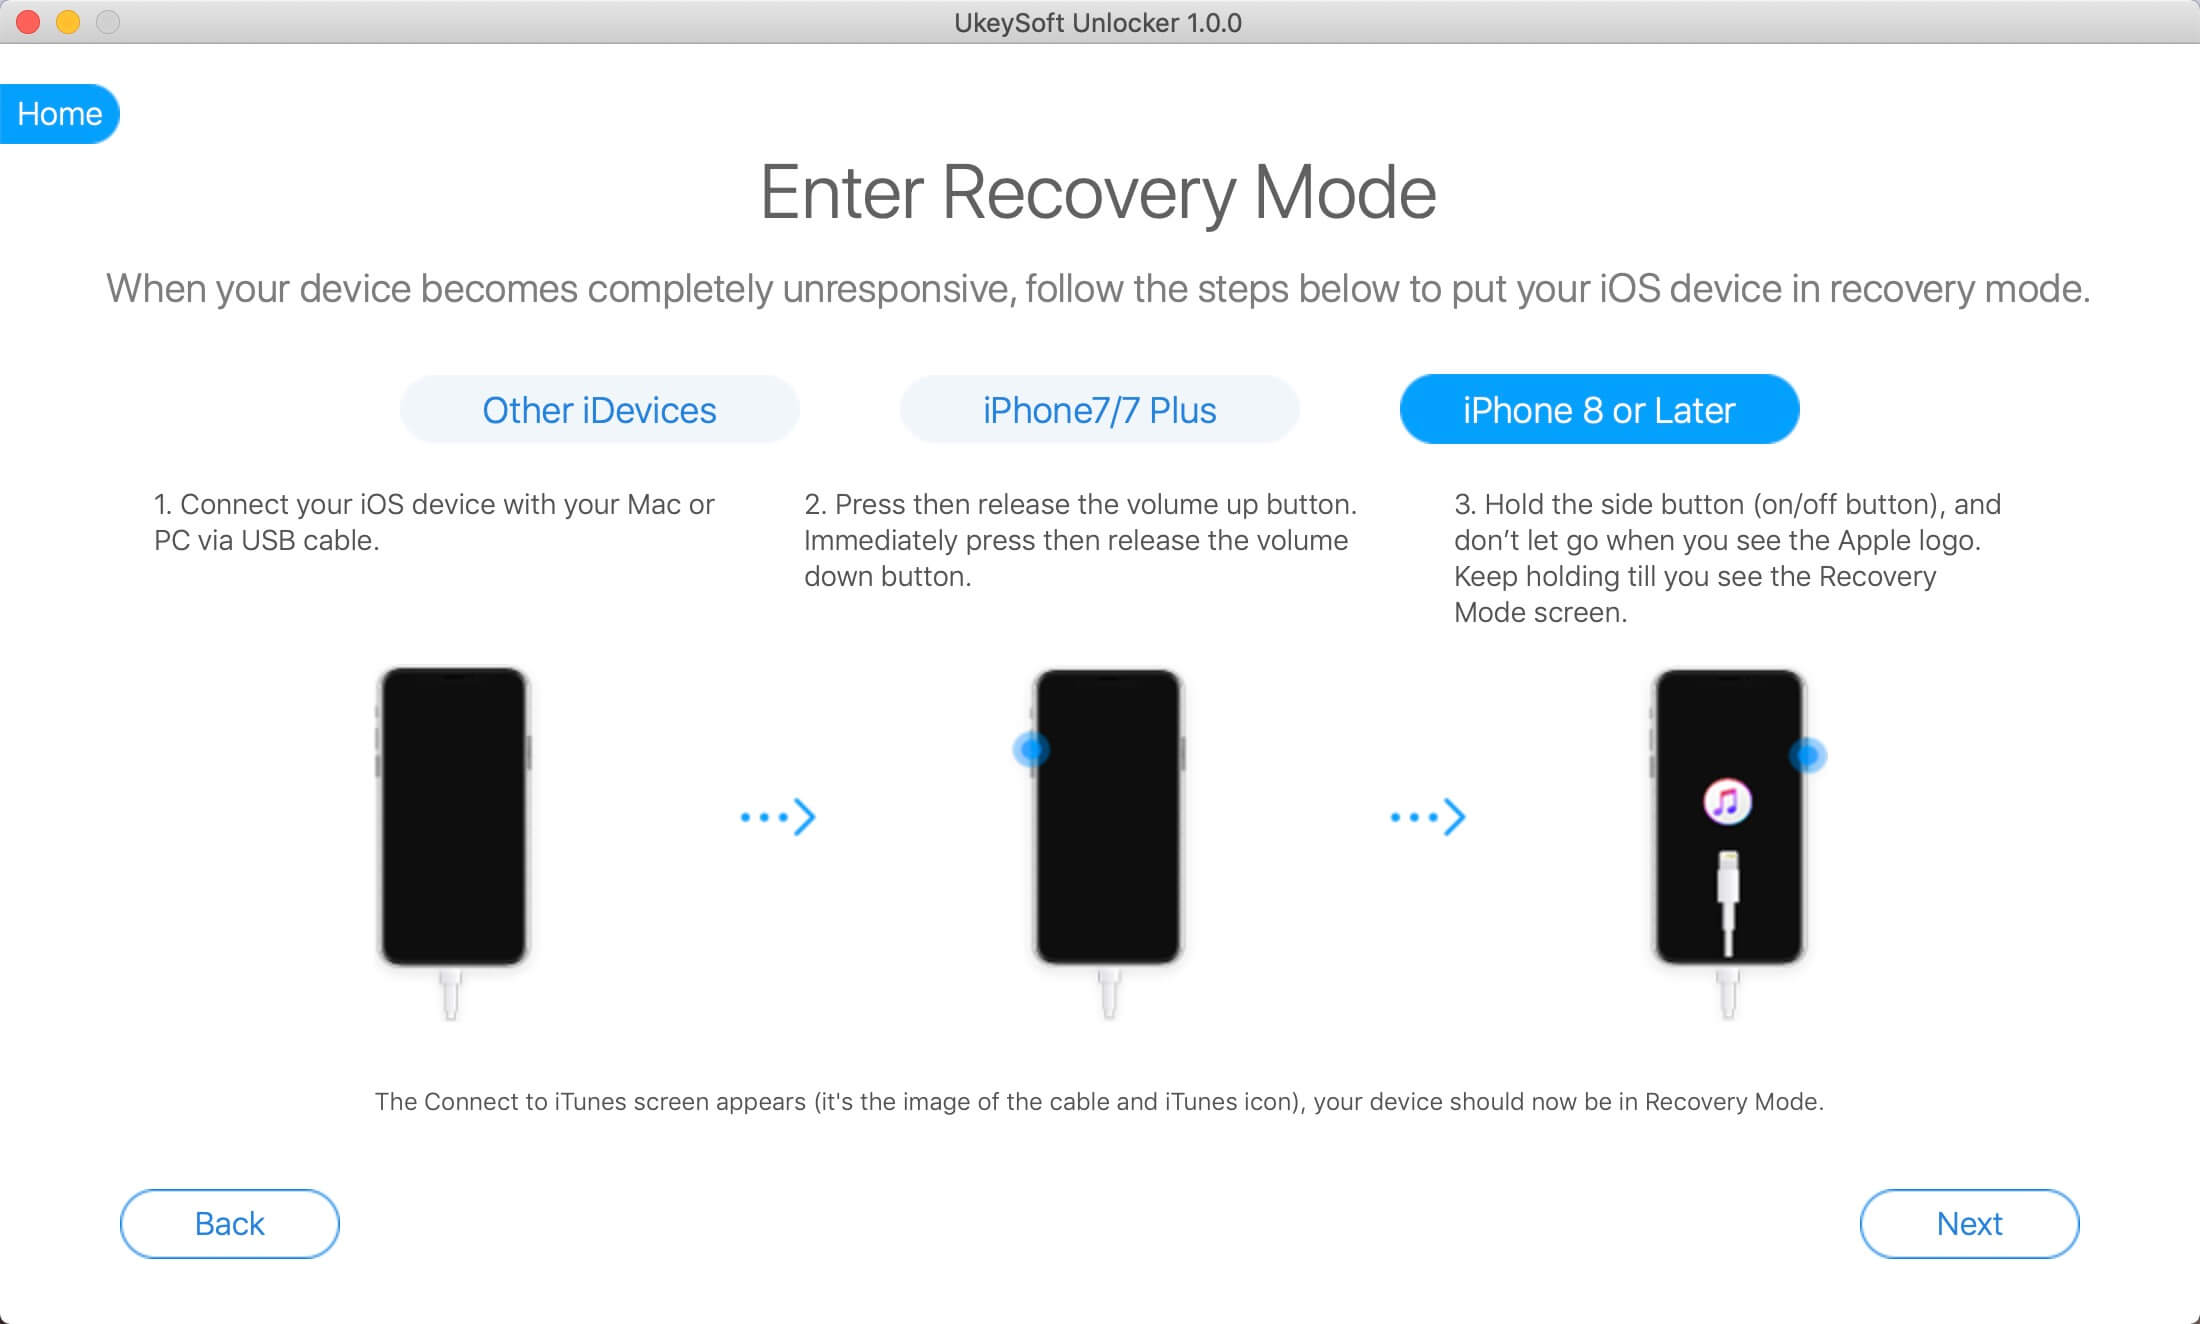 Enter Recovery Mode on iPhone